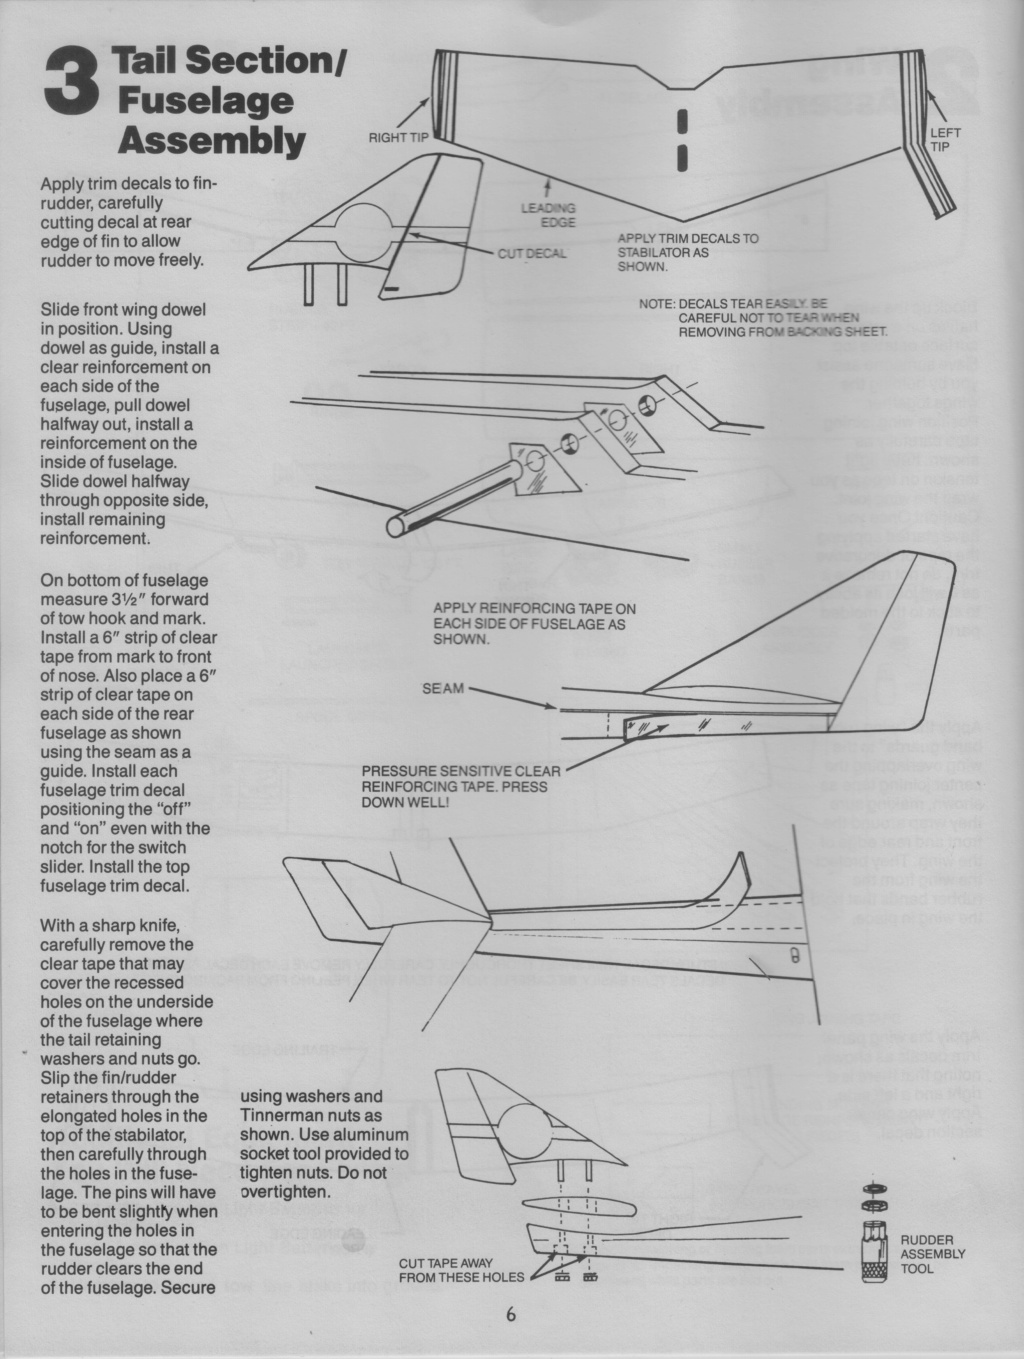 Eagle II pictures and manual scans. Eagle_17